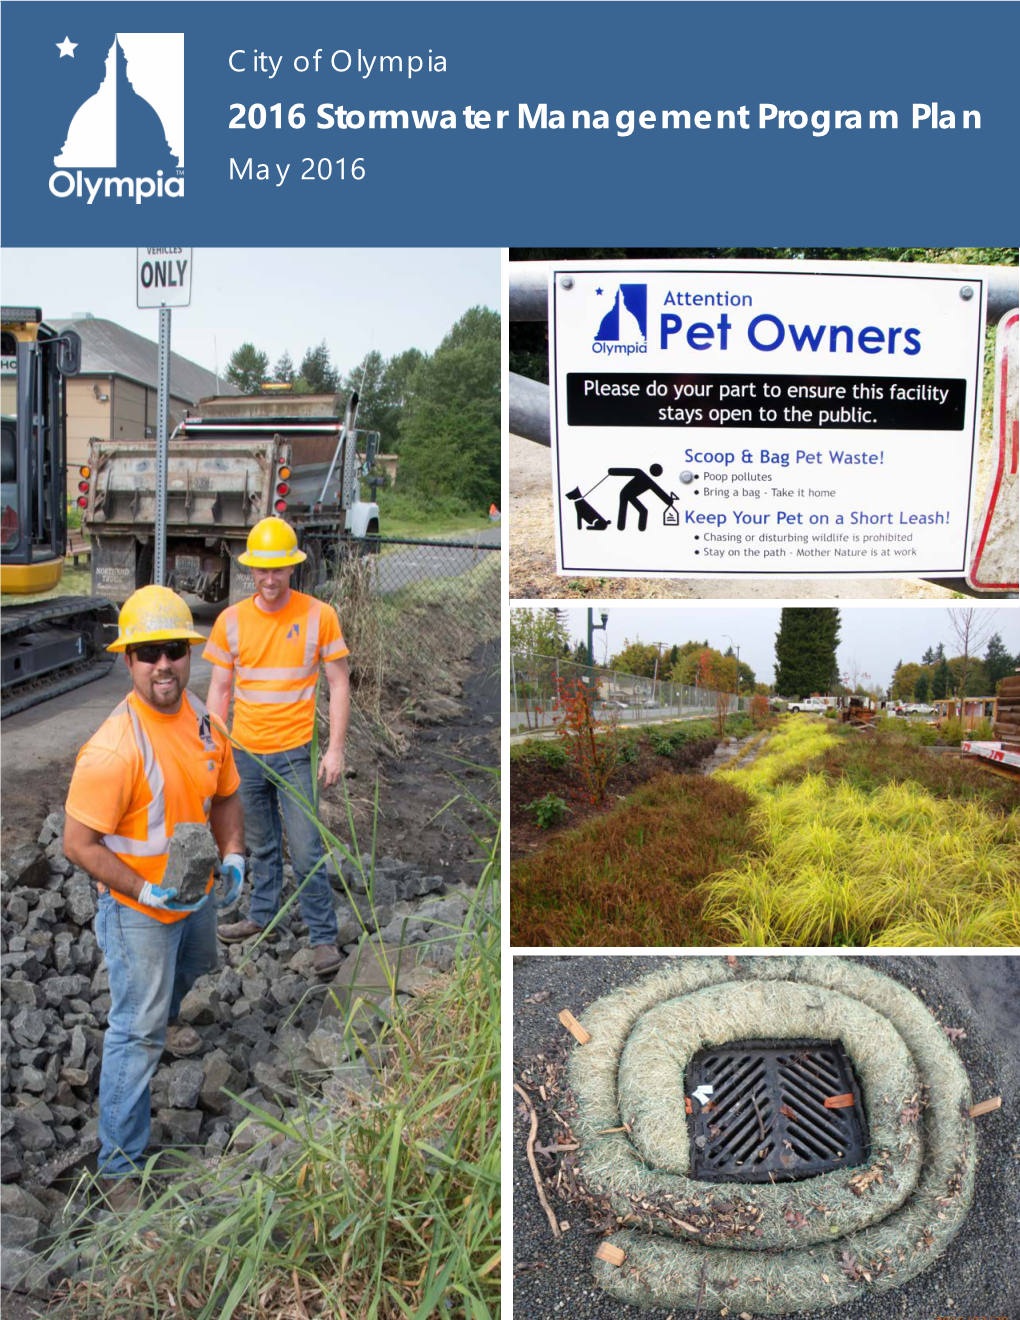 2016 Stormwater Management Program Plan May 2016 City of Olympia 2016 Stormwater Management Program (SWMP) Plan Prepared February 2016